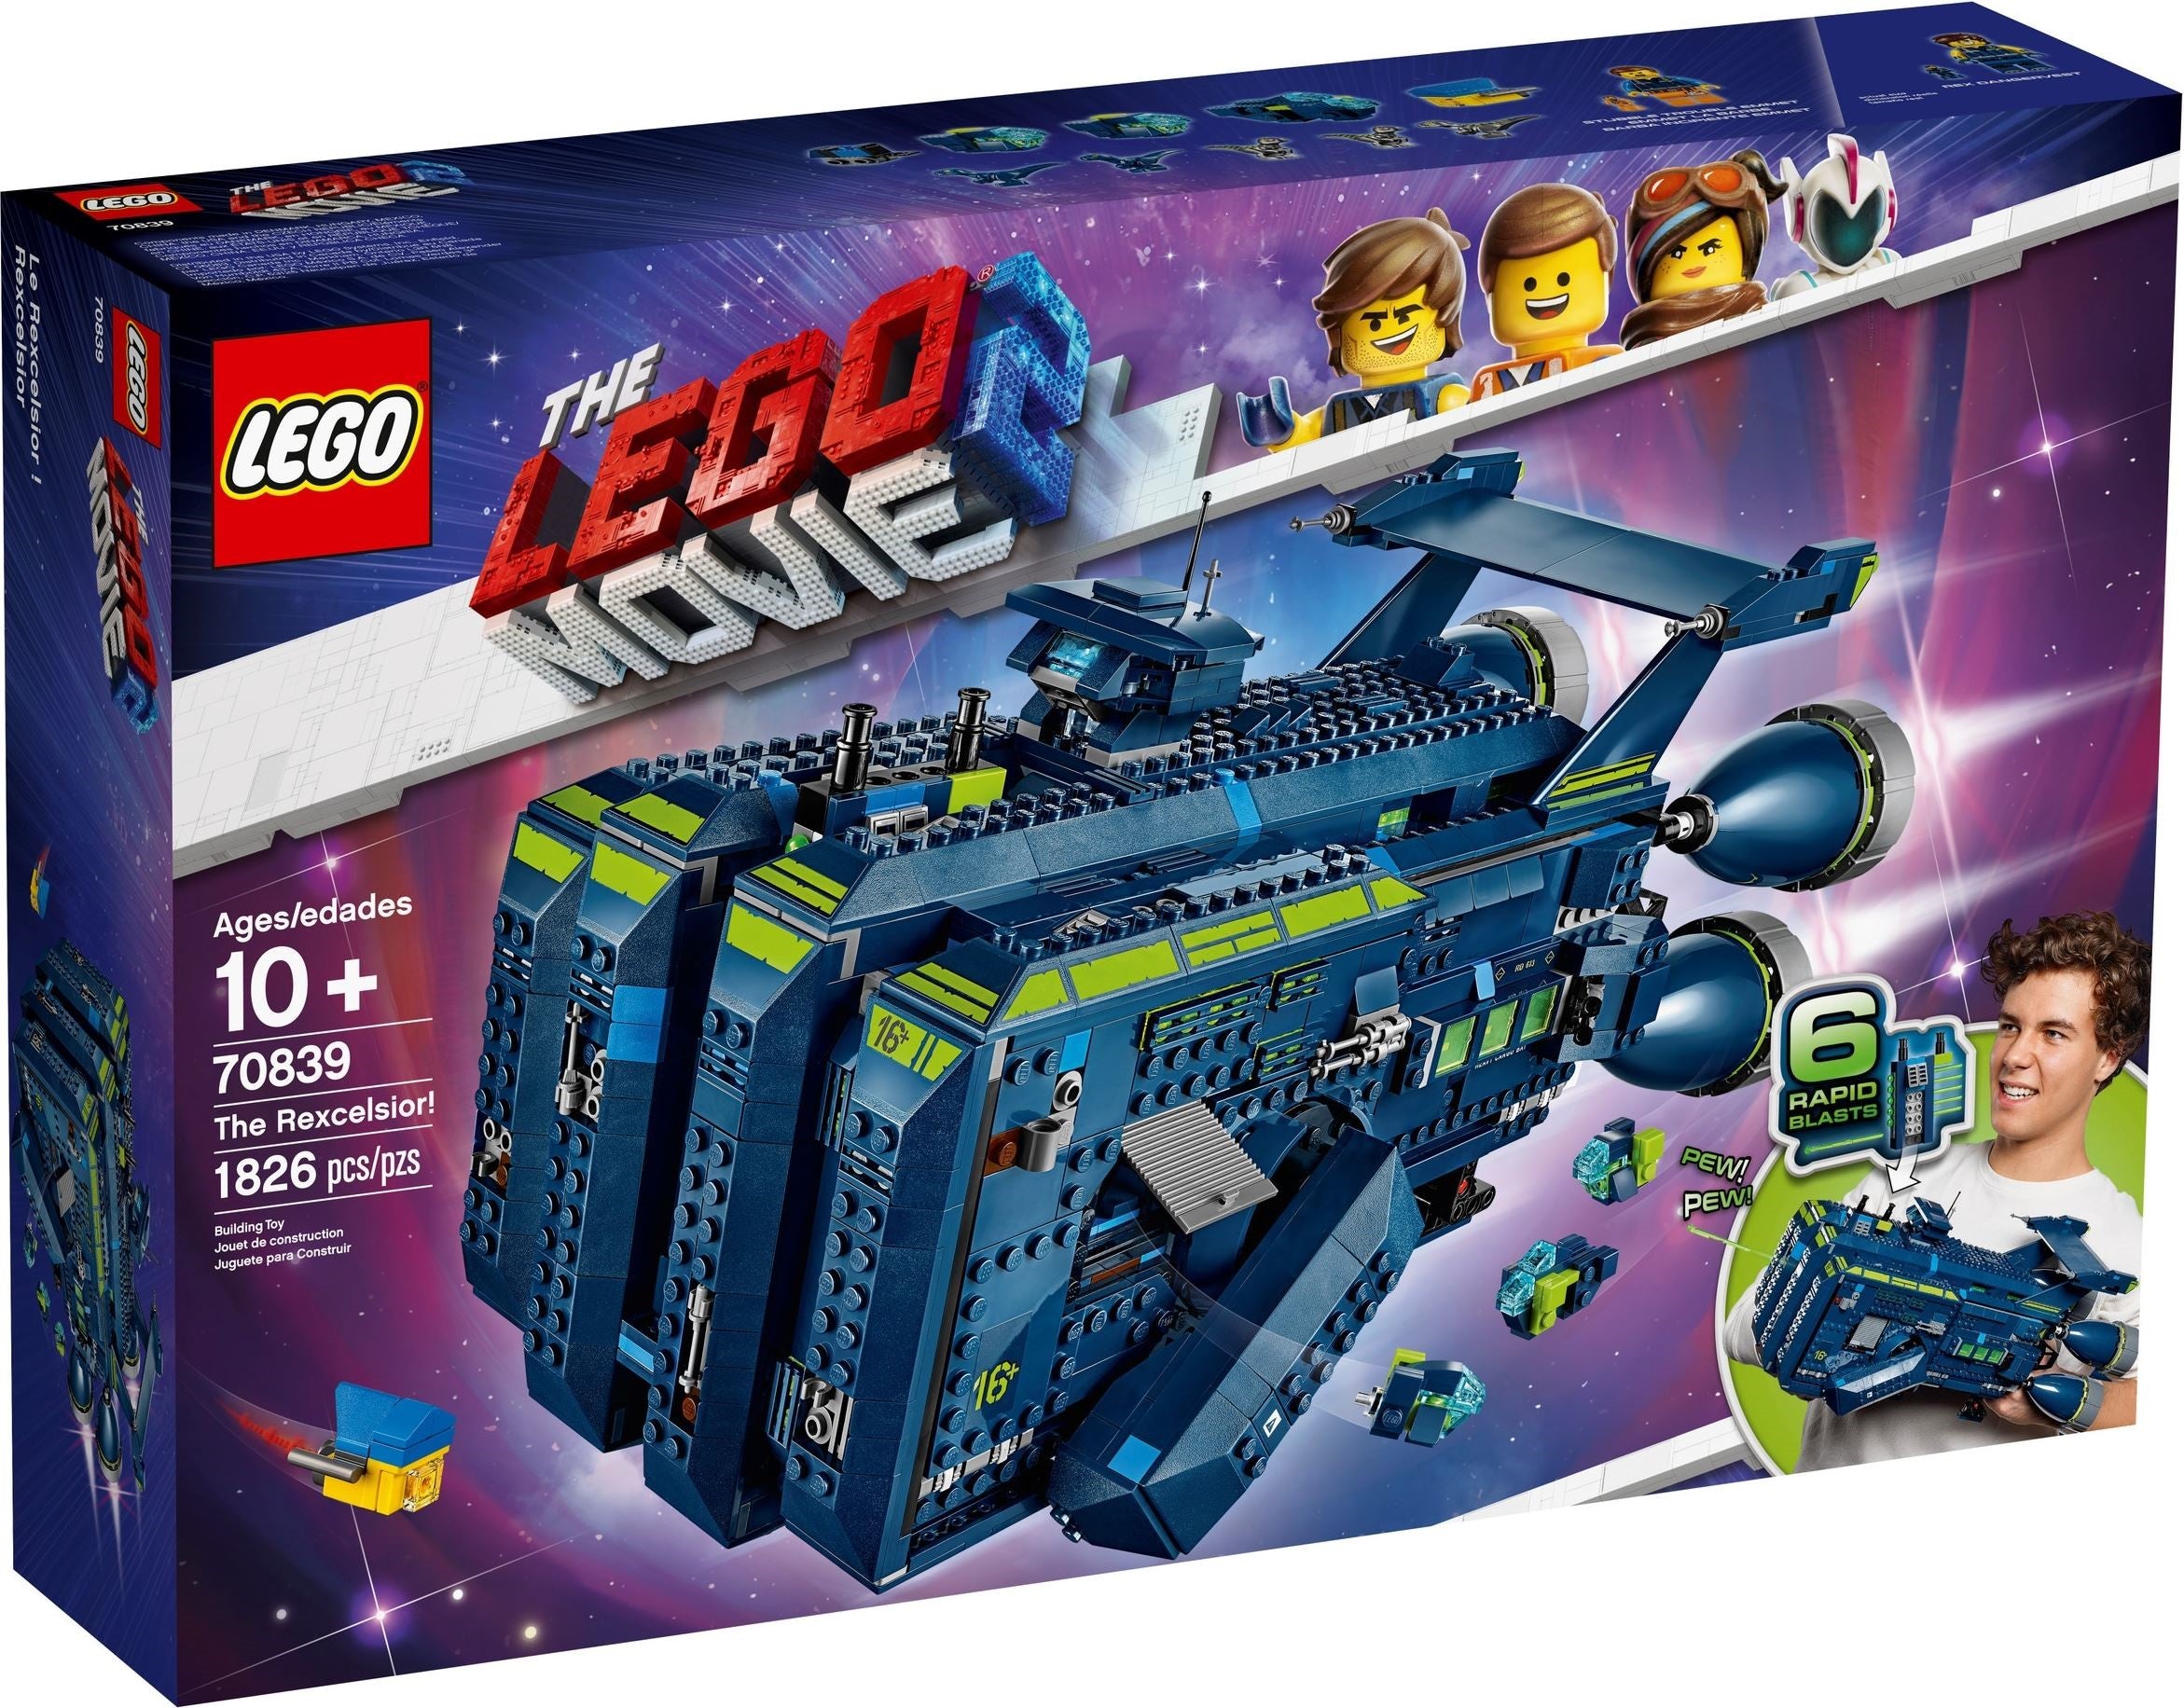 Lego The Lego Movie 70839 - The Rexcelsior!